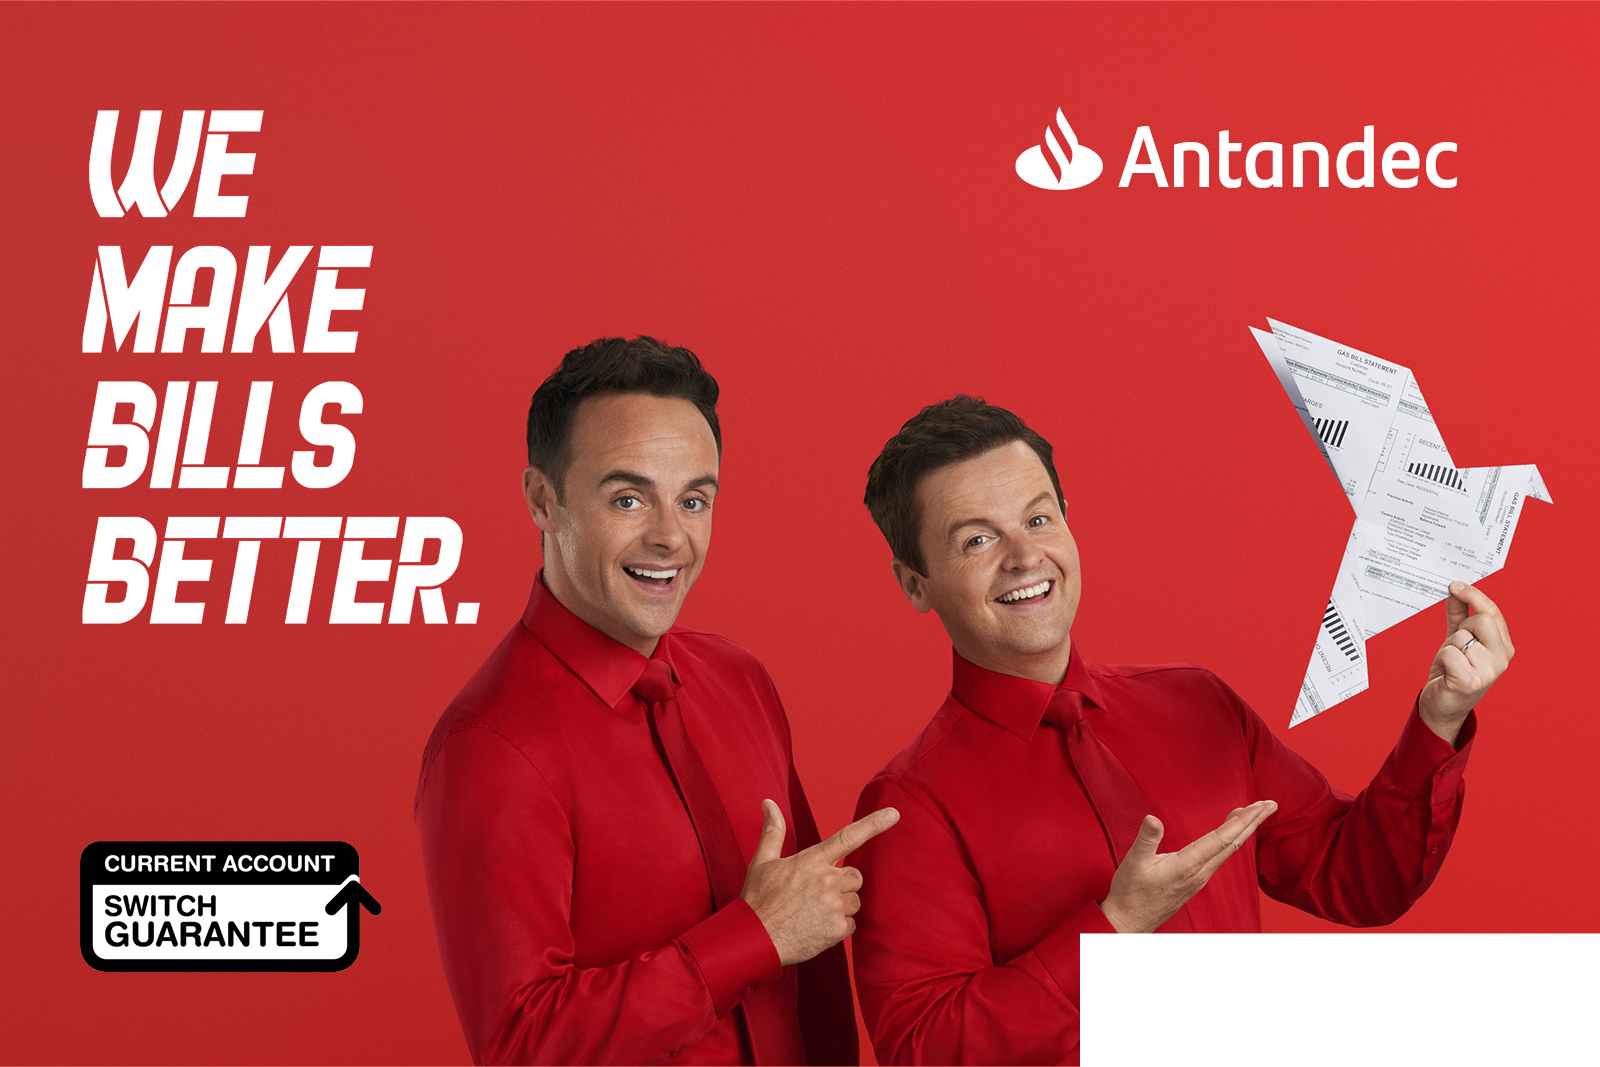 The comedy bank of Antandec is back! Ant and Dec are showing us how they plan to 'make bills better' by using them to do origami...